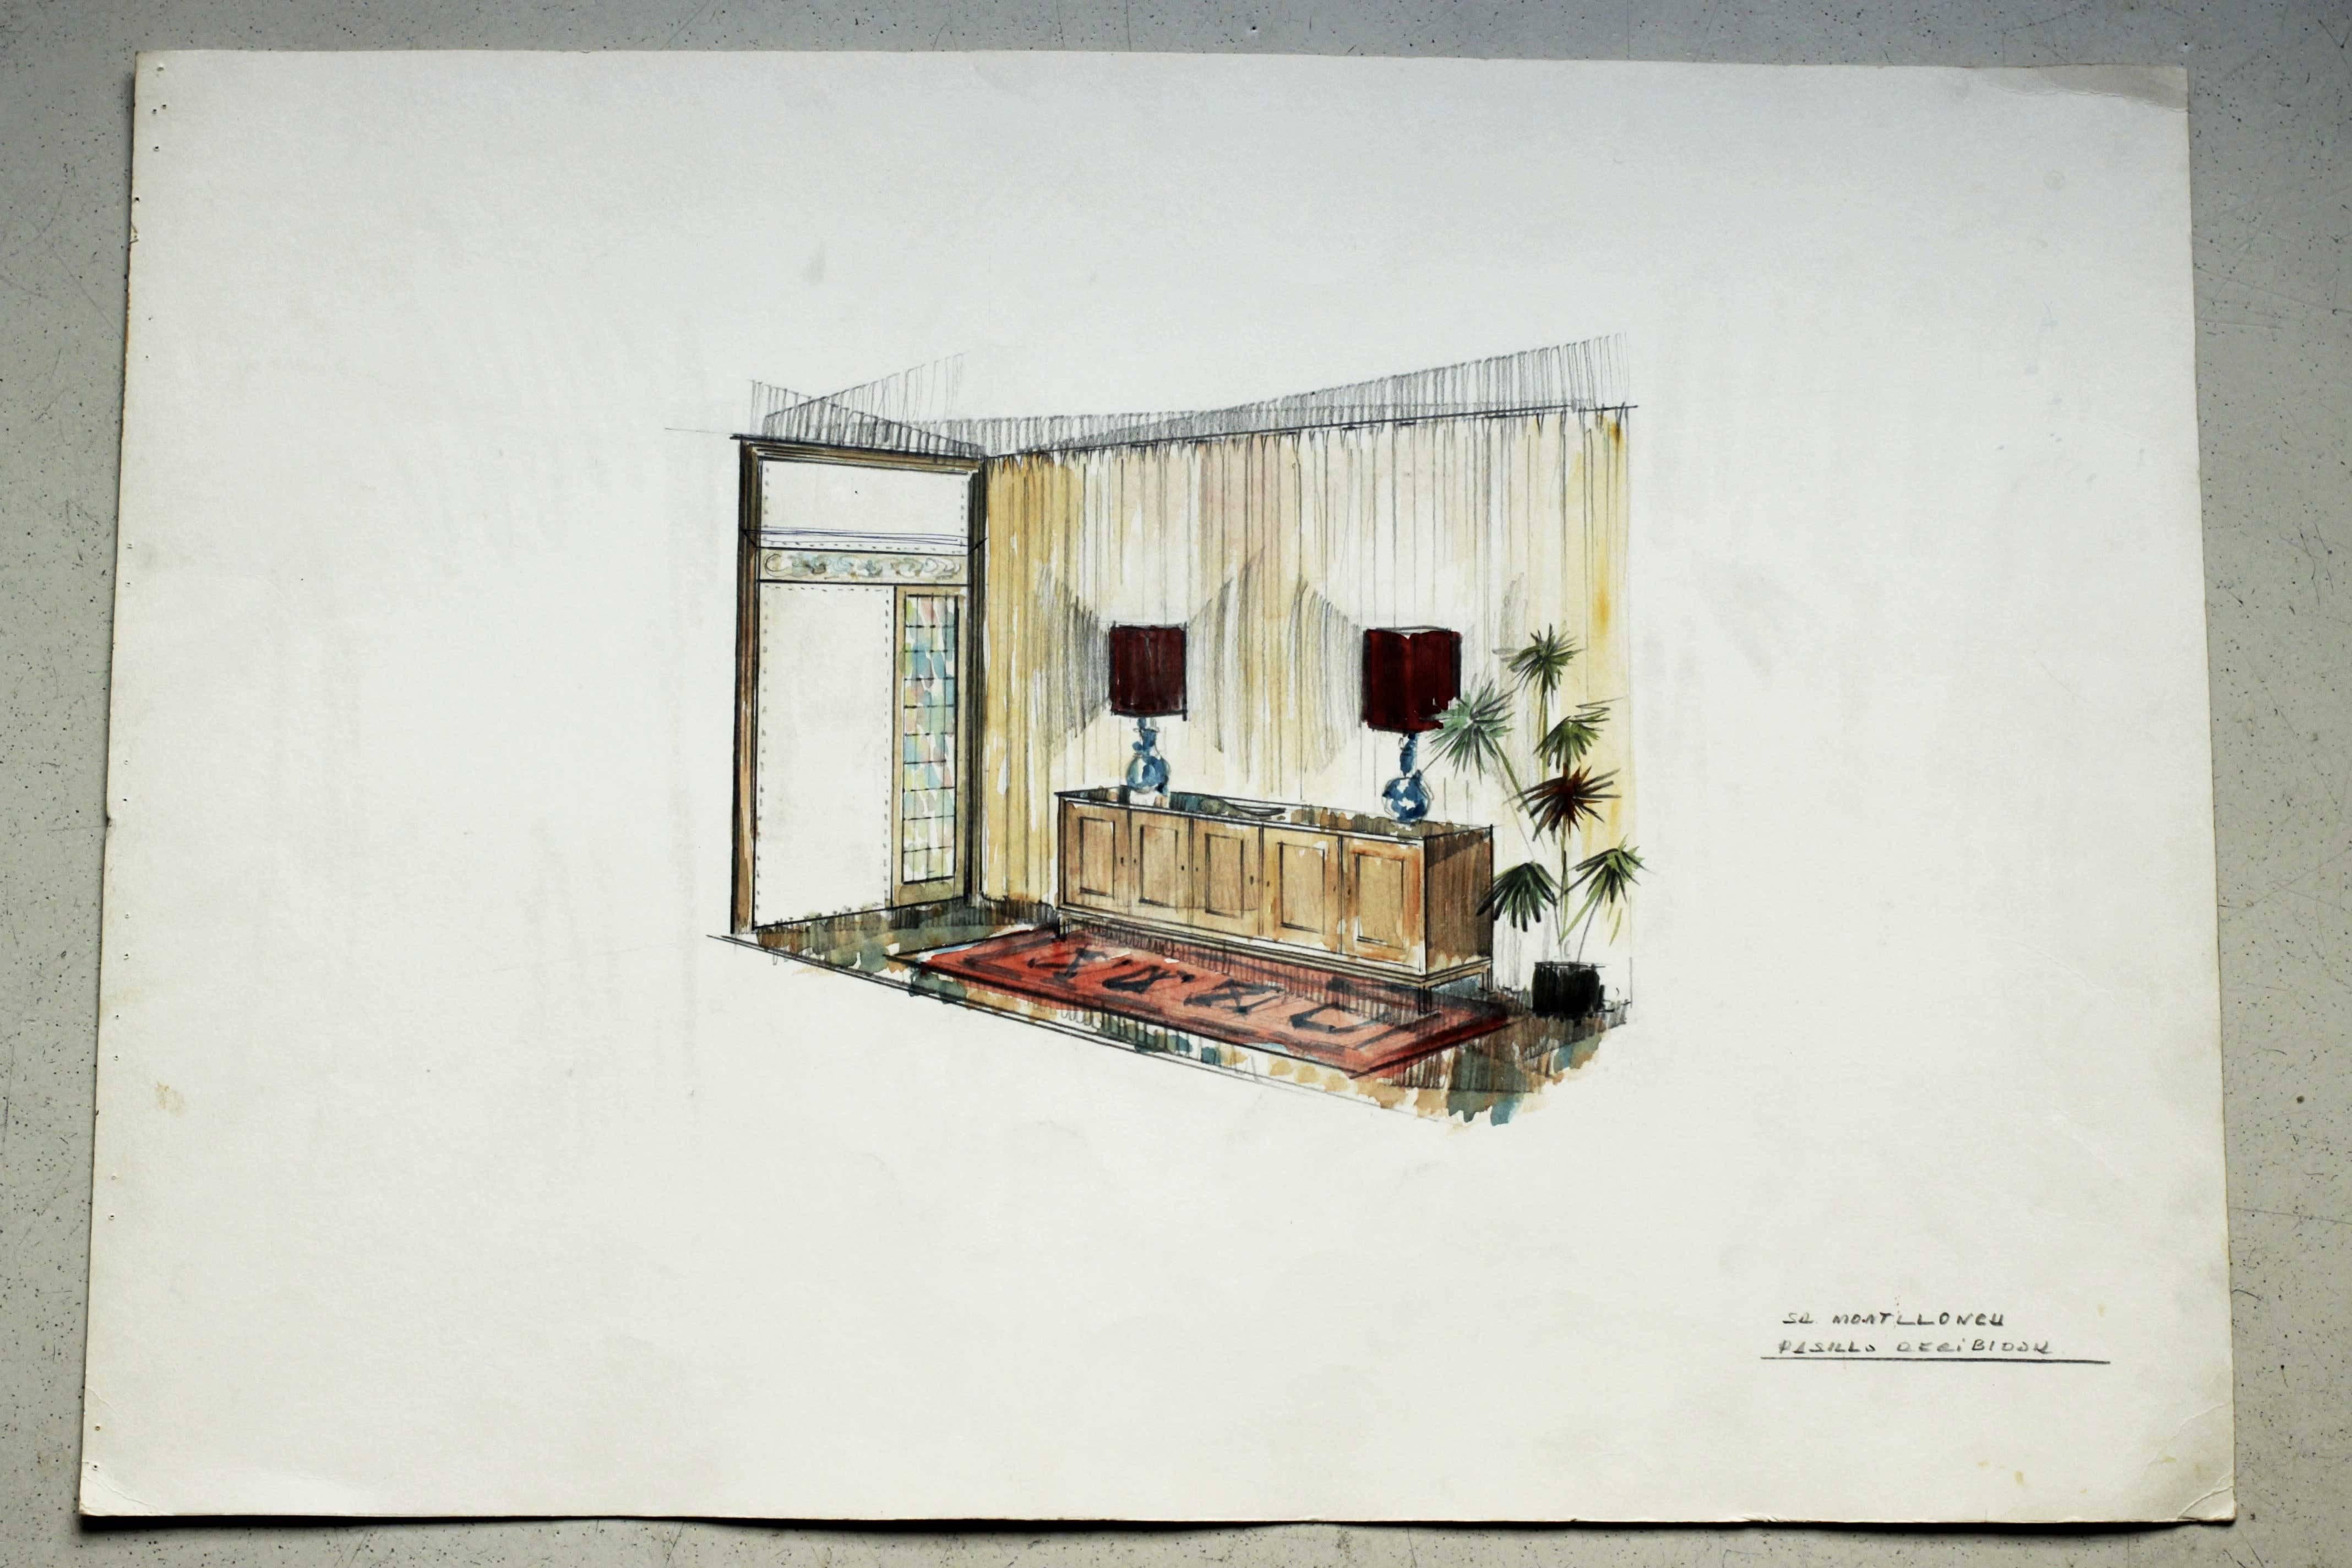 Vintage interior designer work of a bourgeois home made for a Spanish client in the 1970s. Drawing and watercolor techniques on thick paper. Overall good condition, some stains.